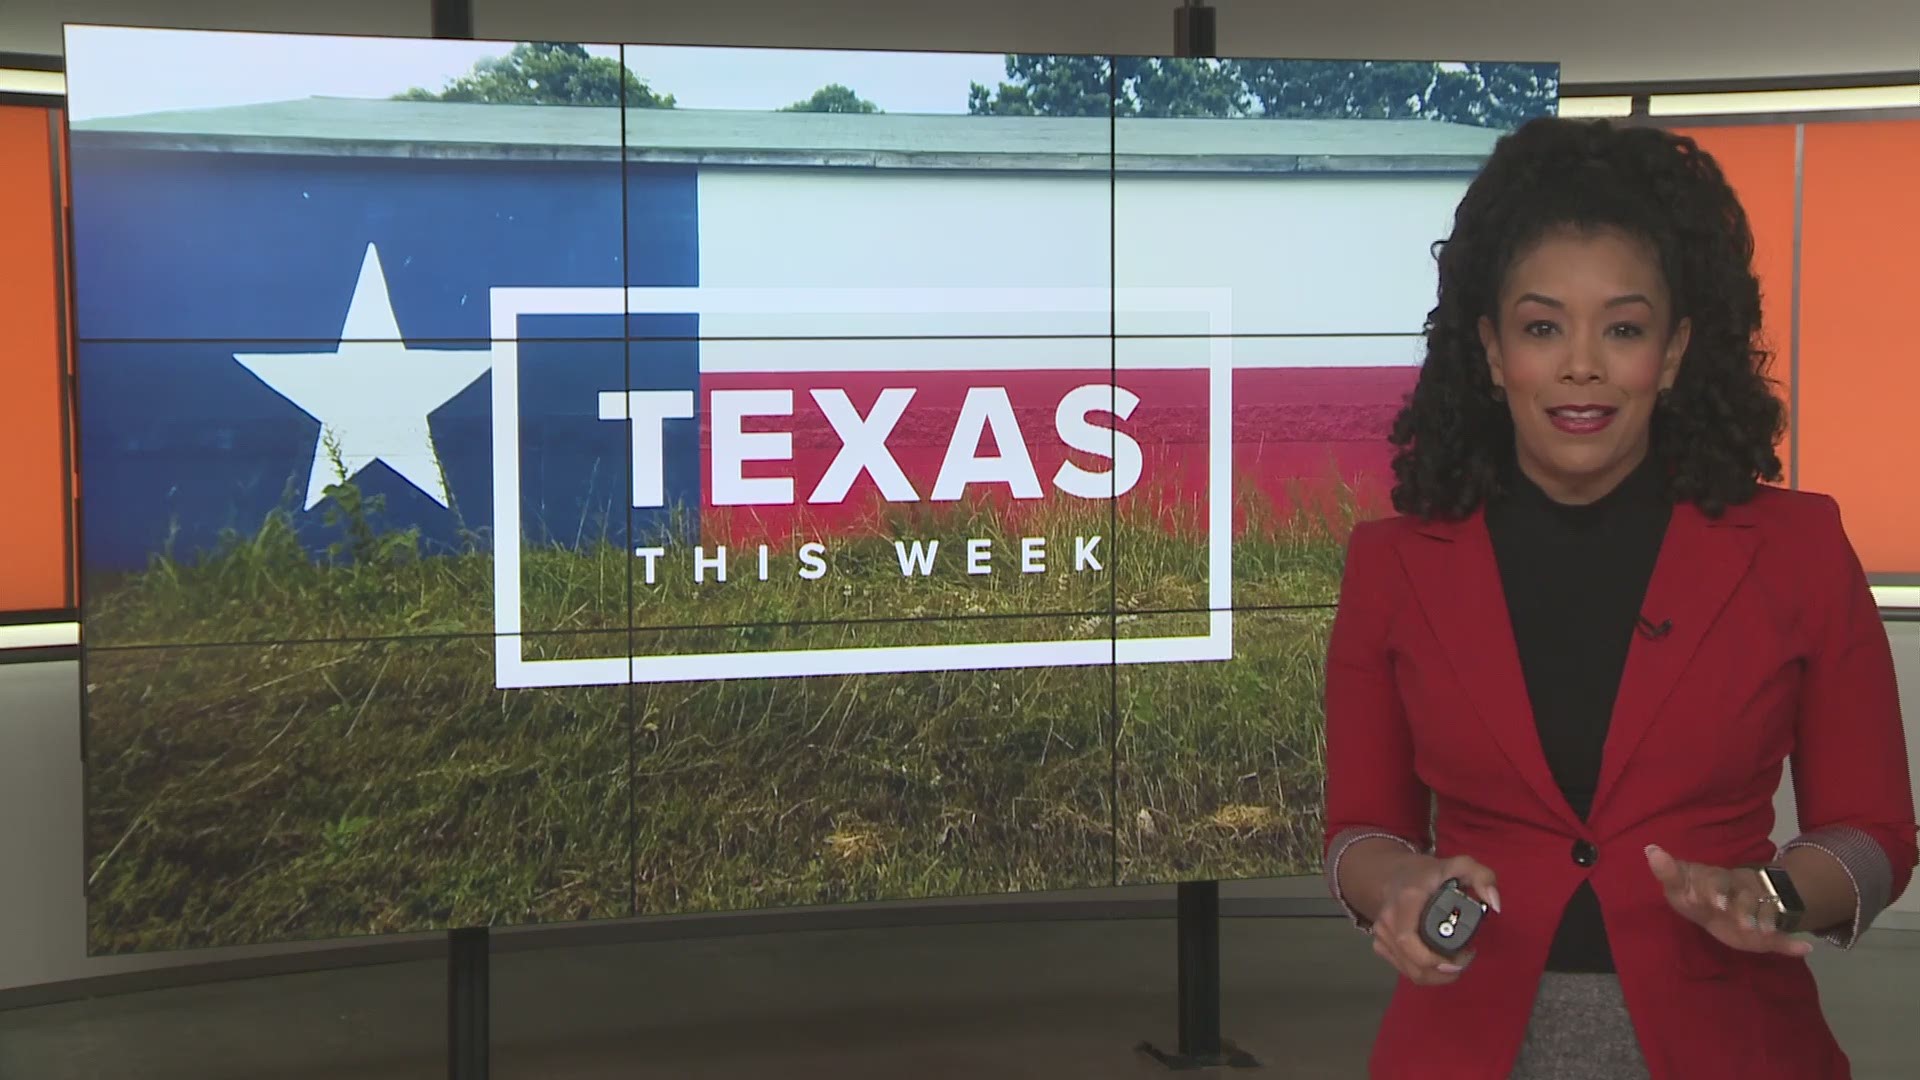 A lot happening in Texas politics this week from new poll numbers to bills moving forward and the tension over the Secretary of State's confirmation.